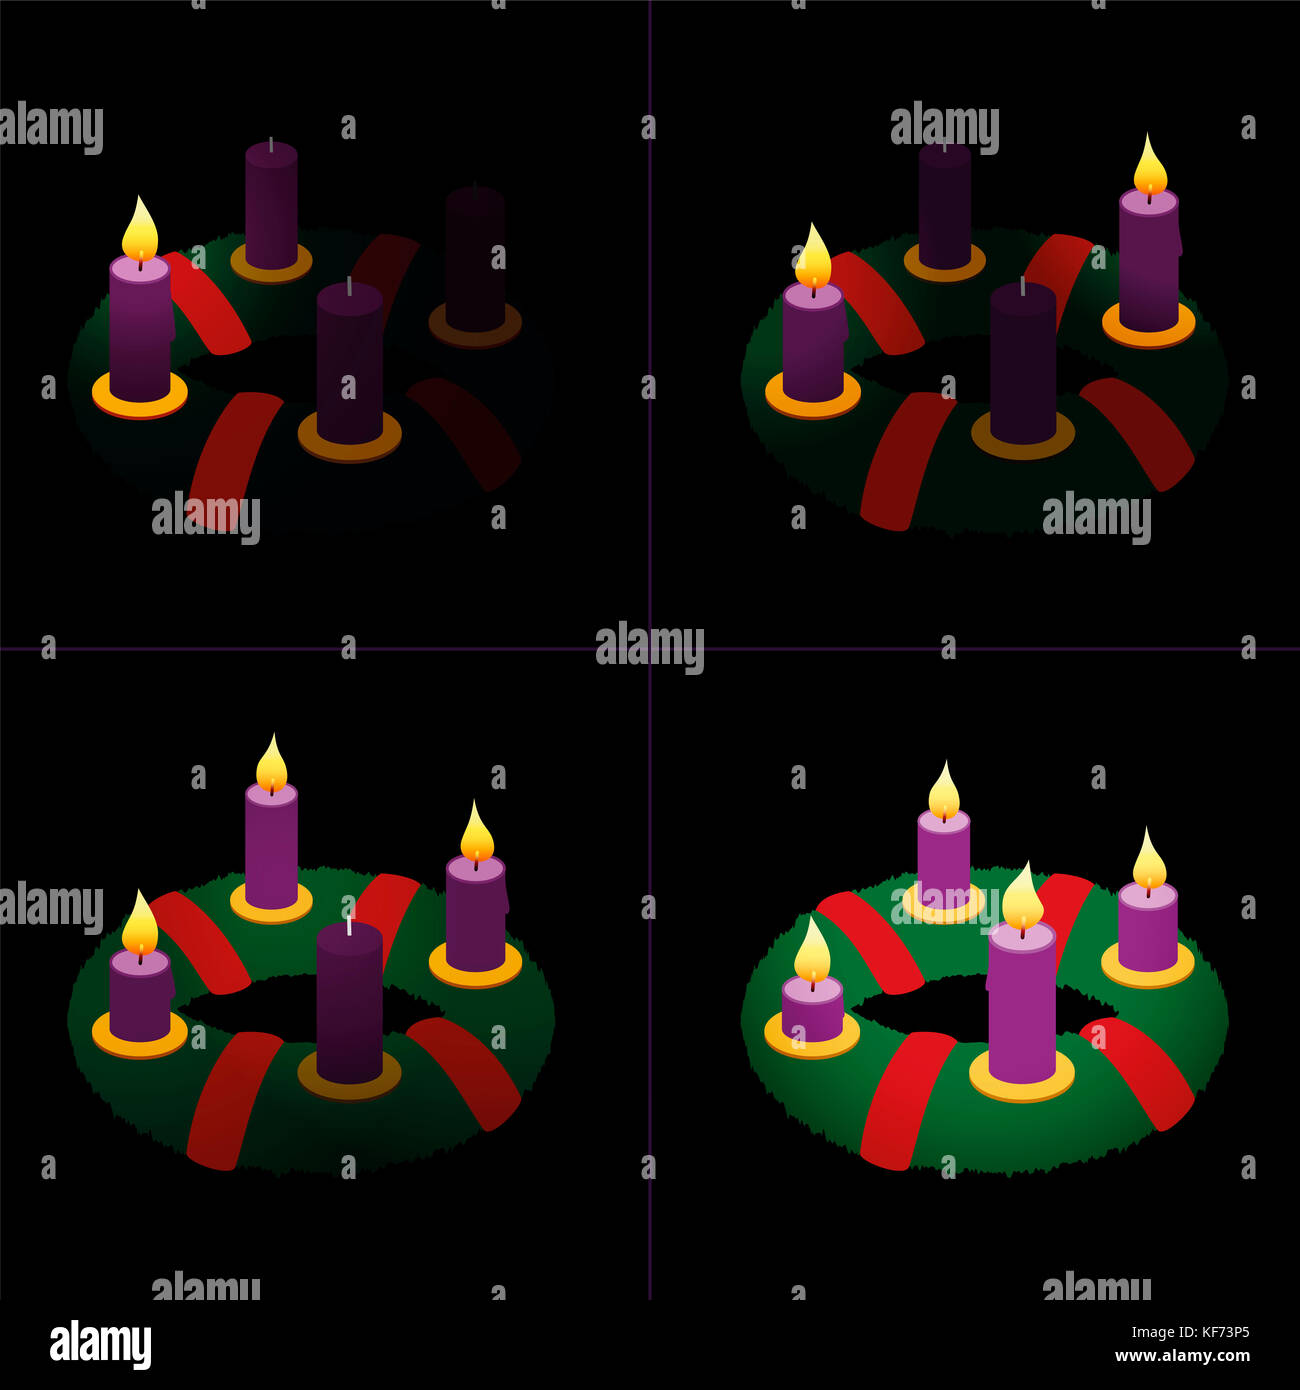 Advent wreath on first, second, third and fourth Sunday of Advent with one, two, three and four lighted purple candles in different lengths. Stock Photo